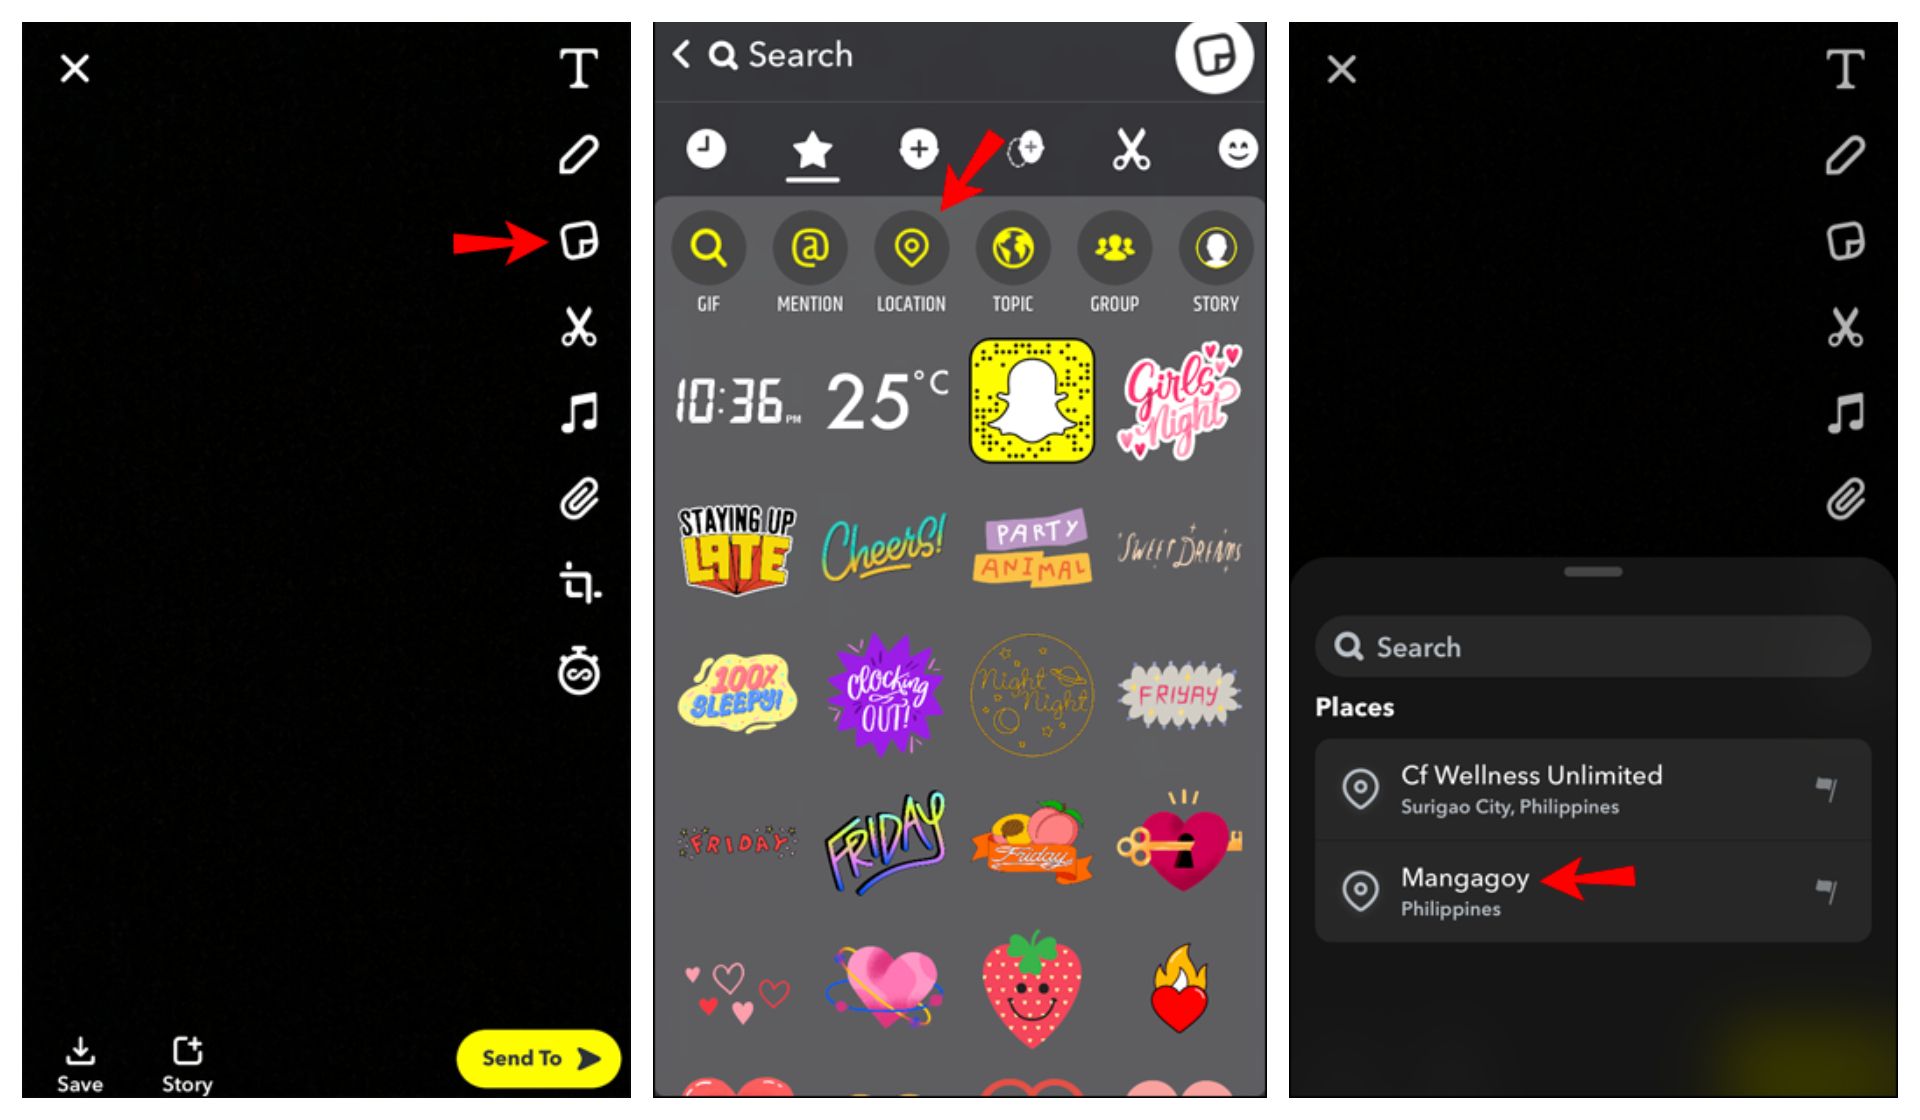 In this article, we are going to be going over how to add location filters on Snapchat, so you can customize your posts on the app however you like.